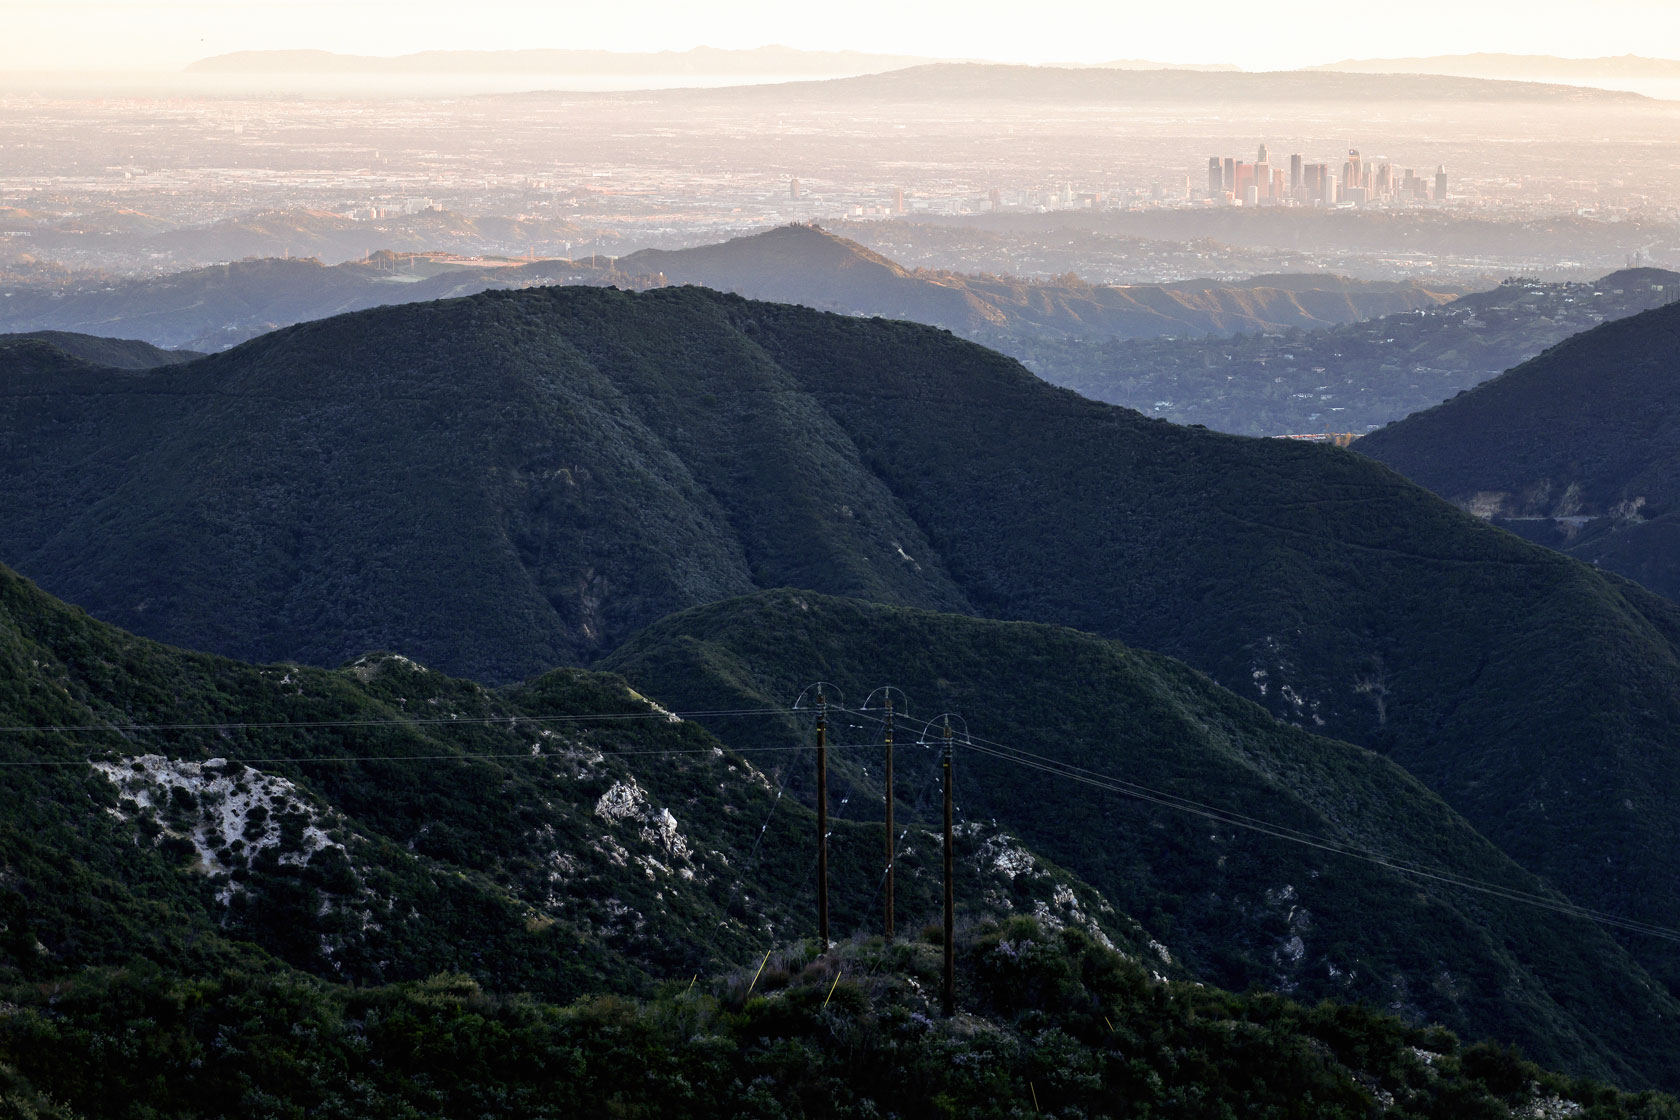 A view of the San Gabriel Mountains National Monument, with downtown Los Angeles visible in the background.